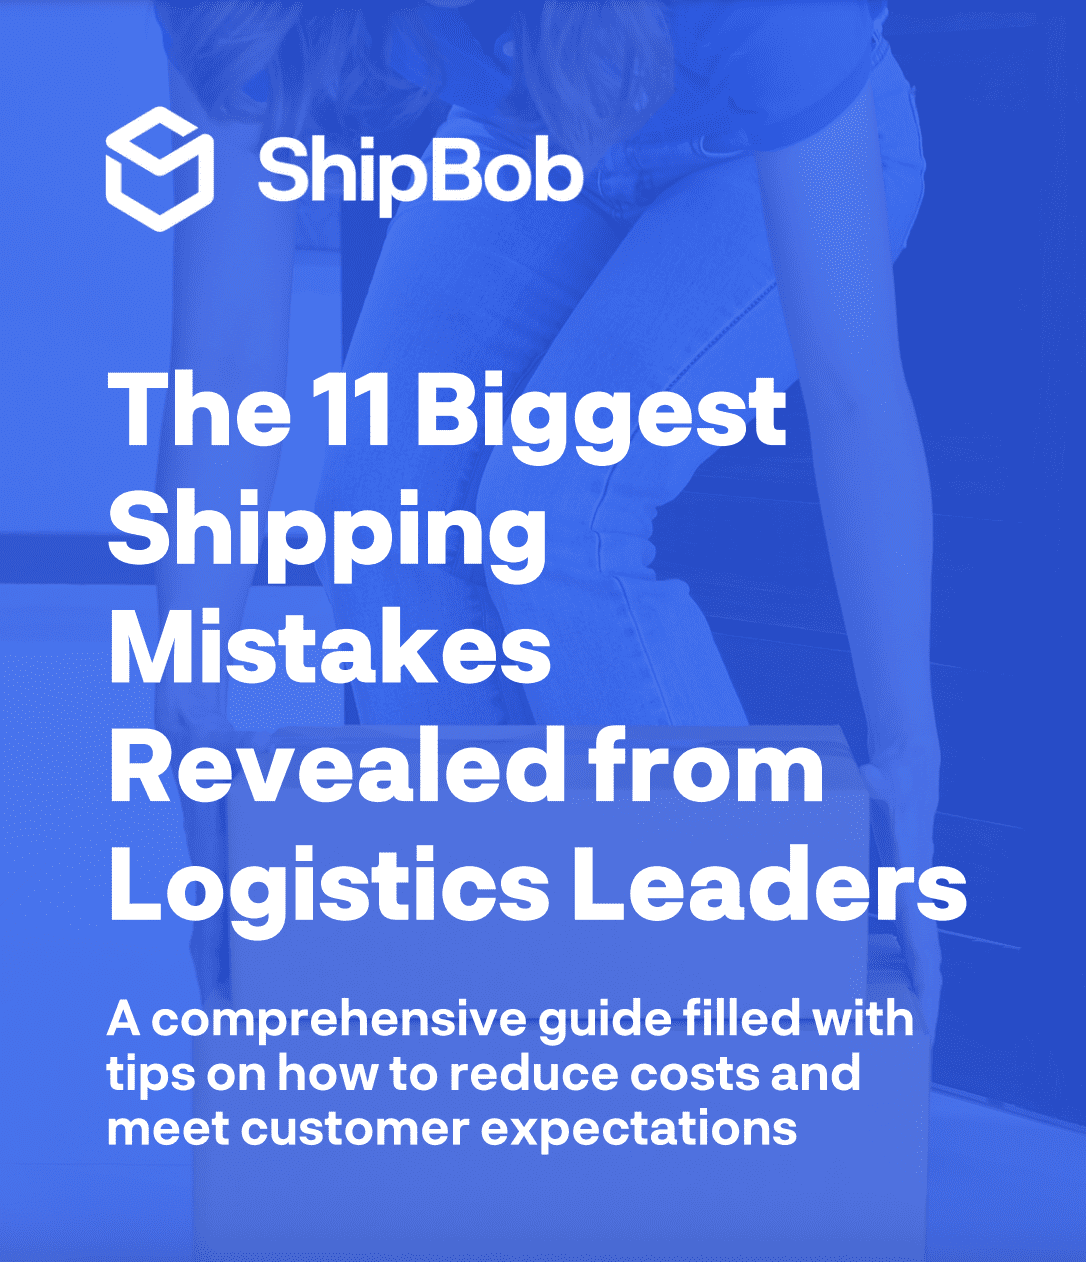 Why Most Dropshipping Businesses Fail: Top Pitfalls Unveiled